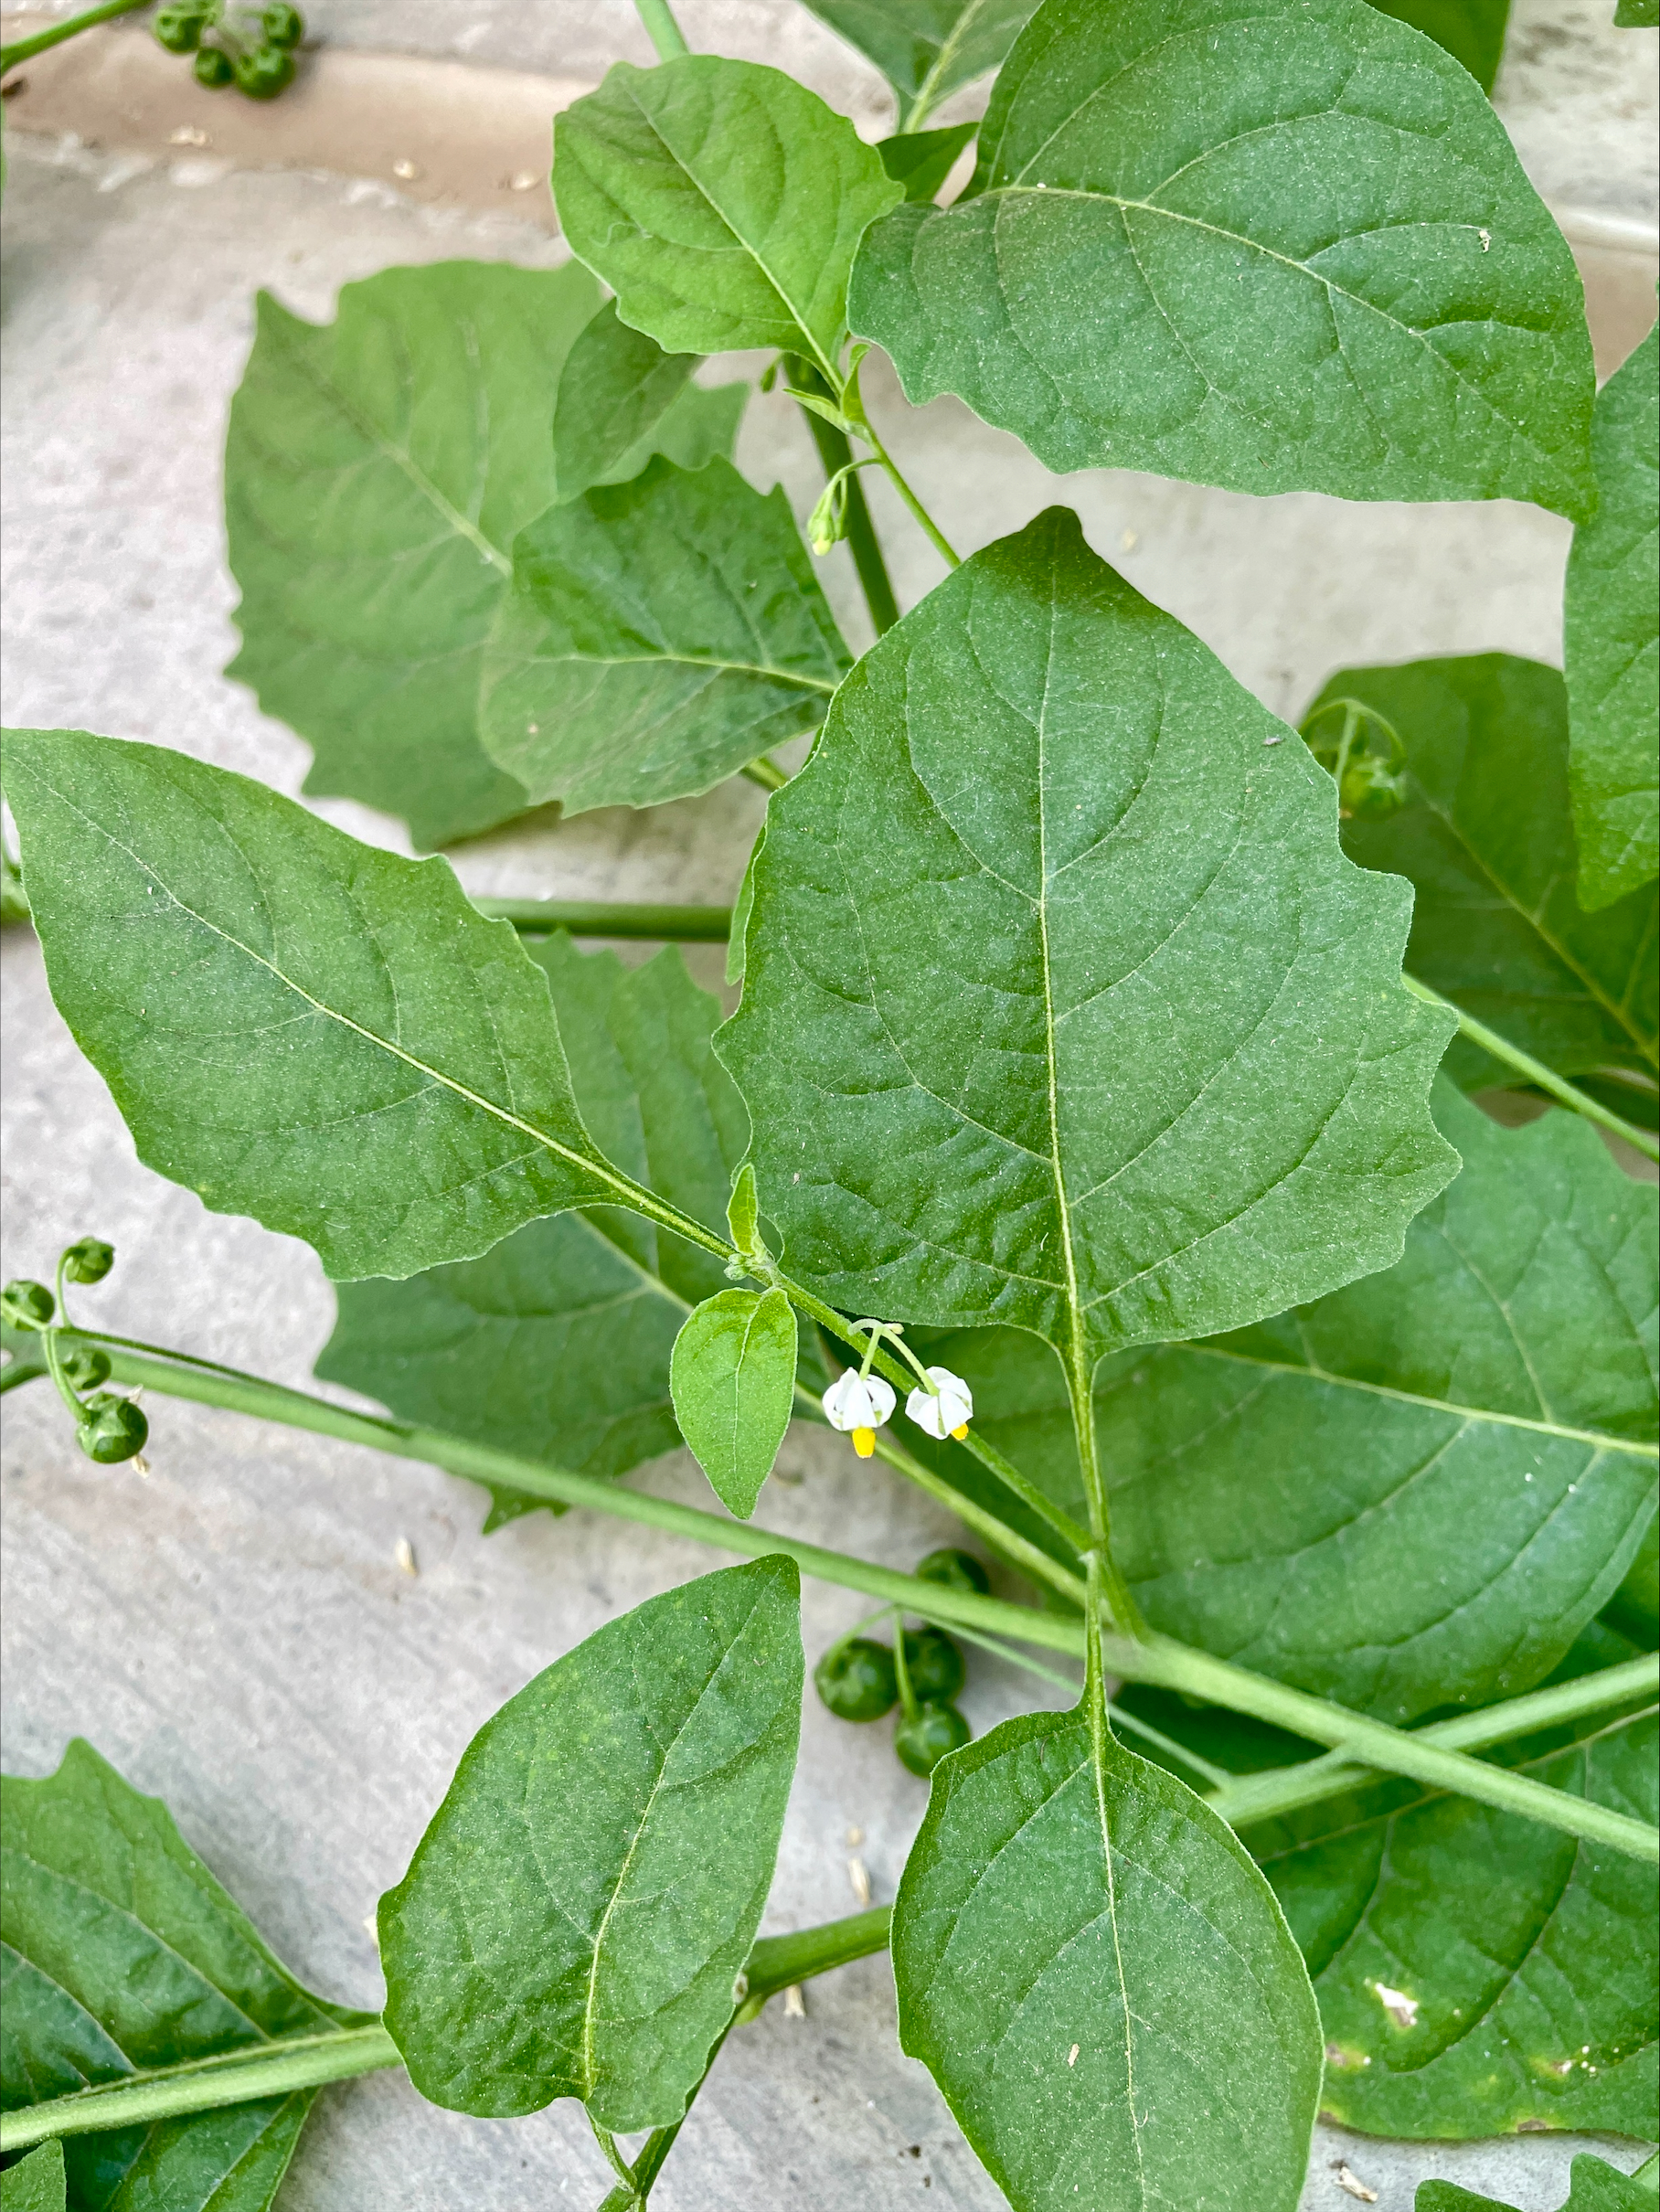 Green leaves, small white and yellow blossoms, and immature seeds on a nightshade plant.